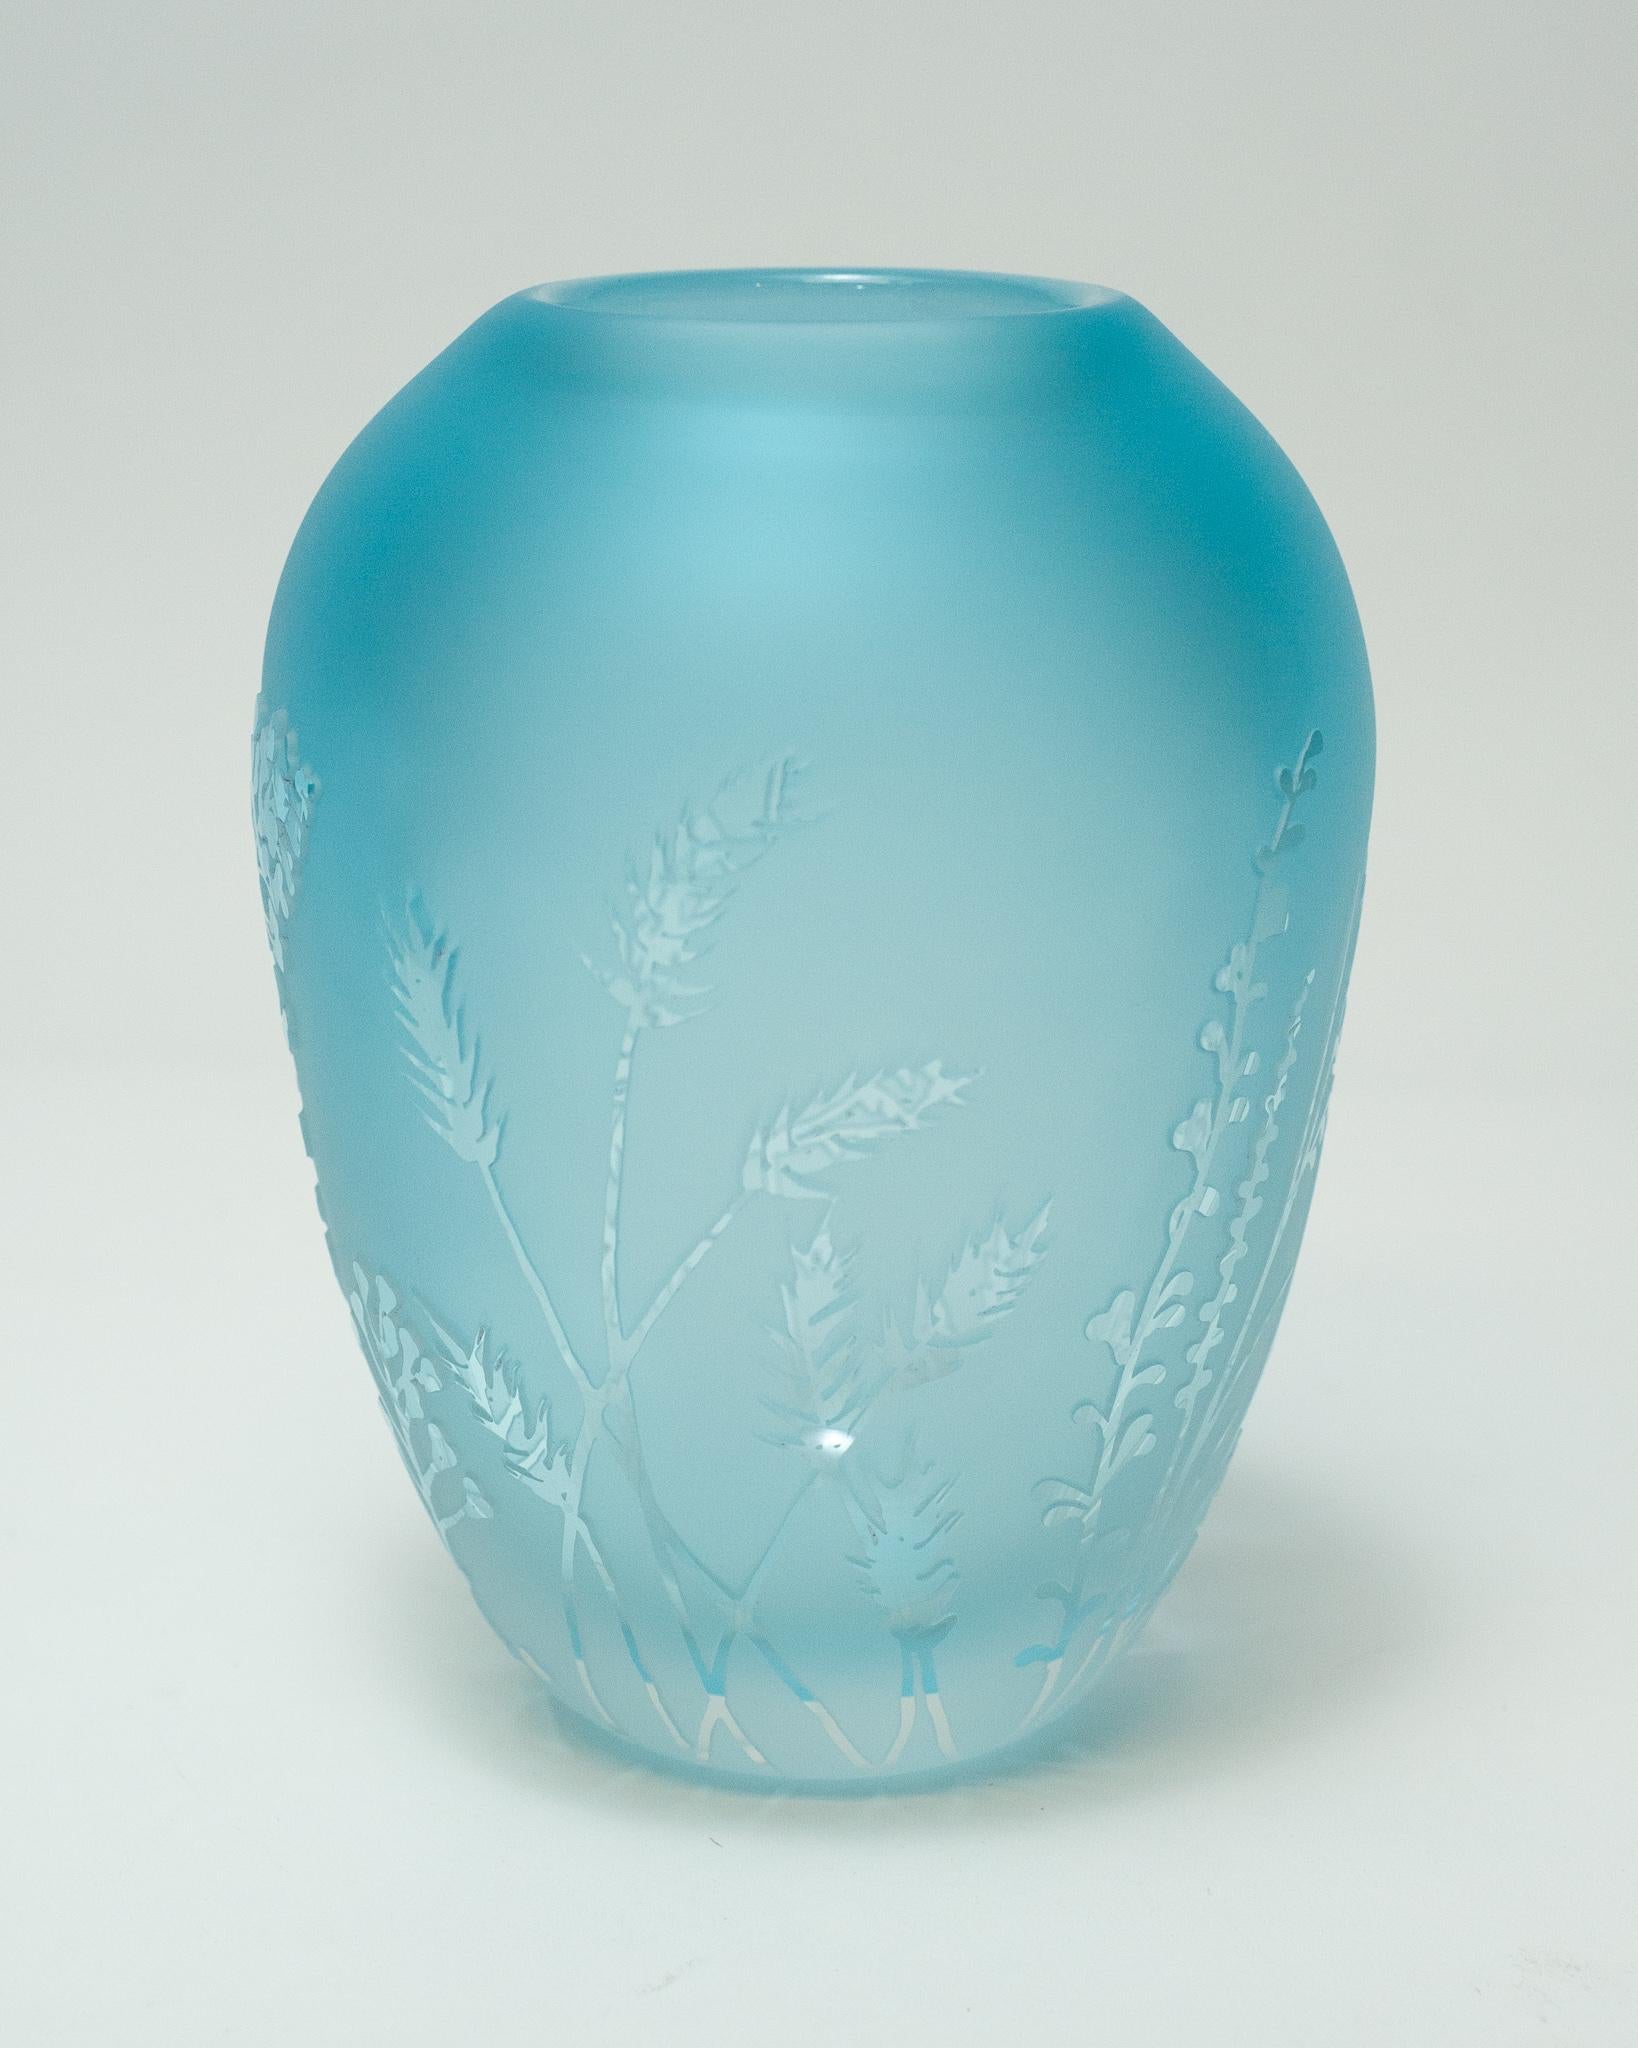 Canadian Contemporary Botanical Large Blue Sandblasted and Clear Cut Blown Glass Vase